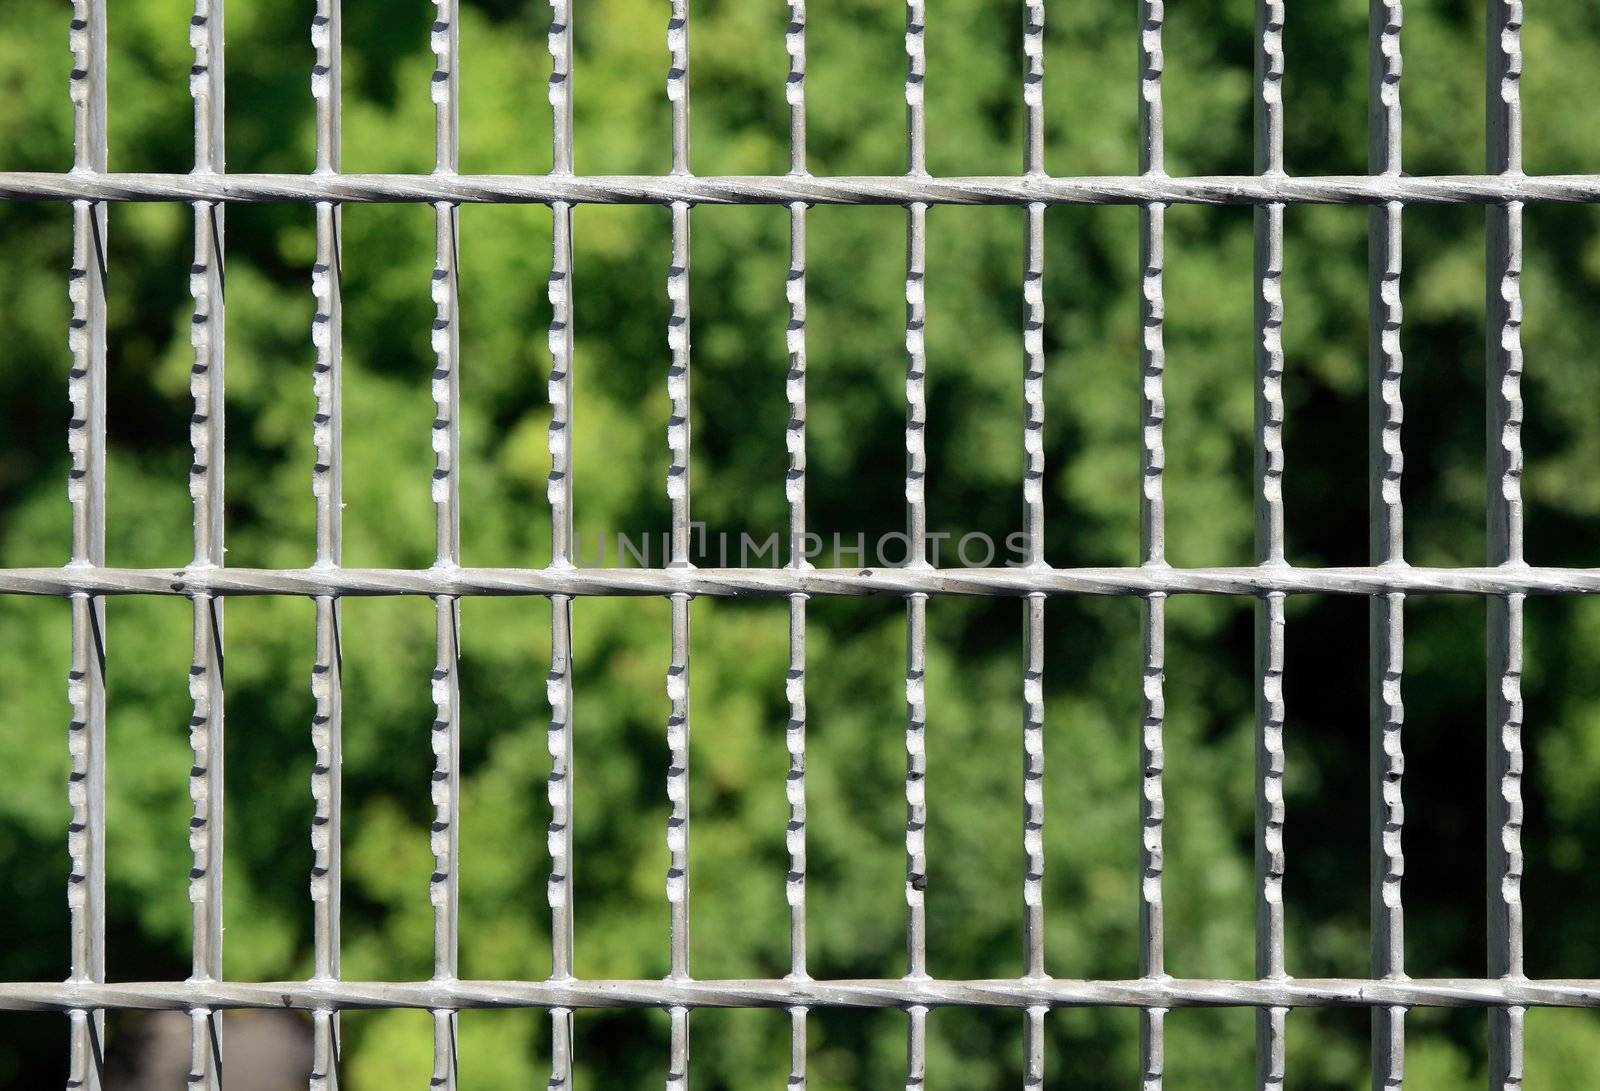 Metal grid with green blurry trees on the background.